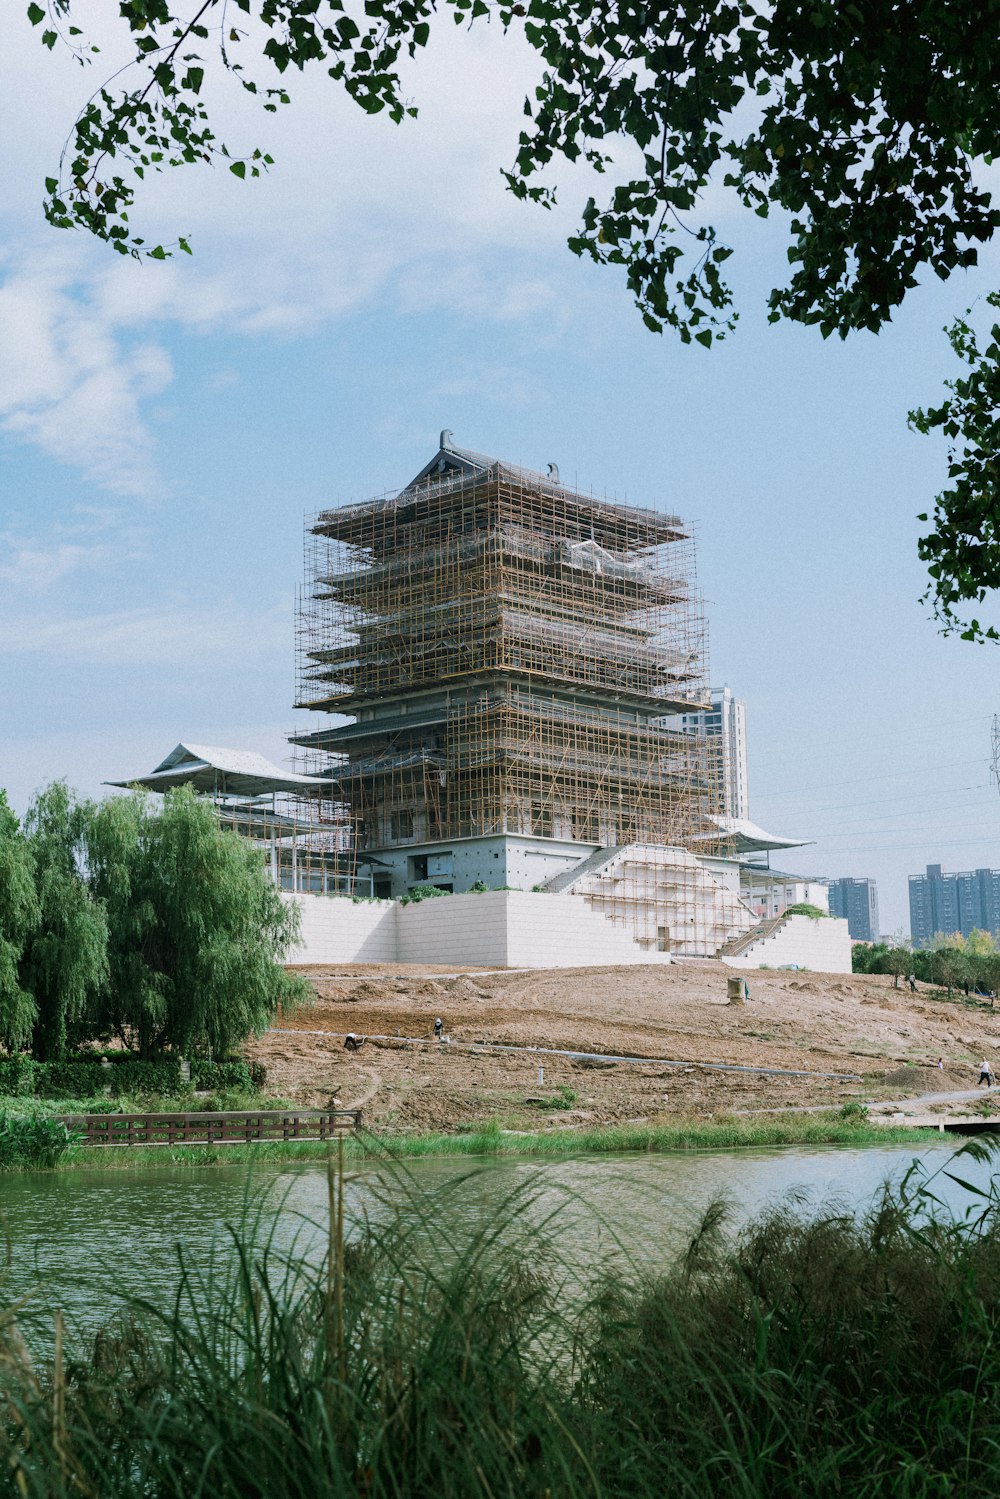 a large building under construction next to a body of water